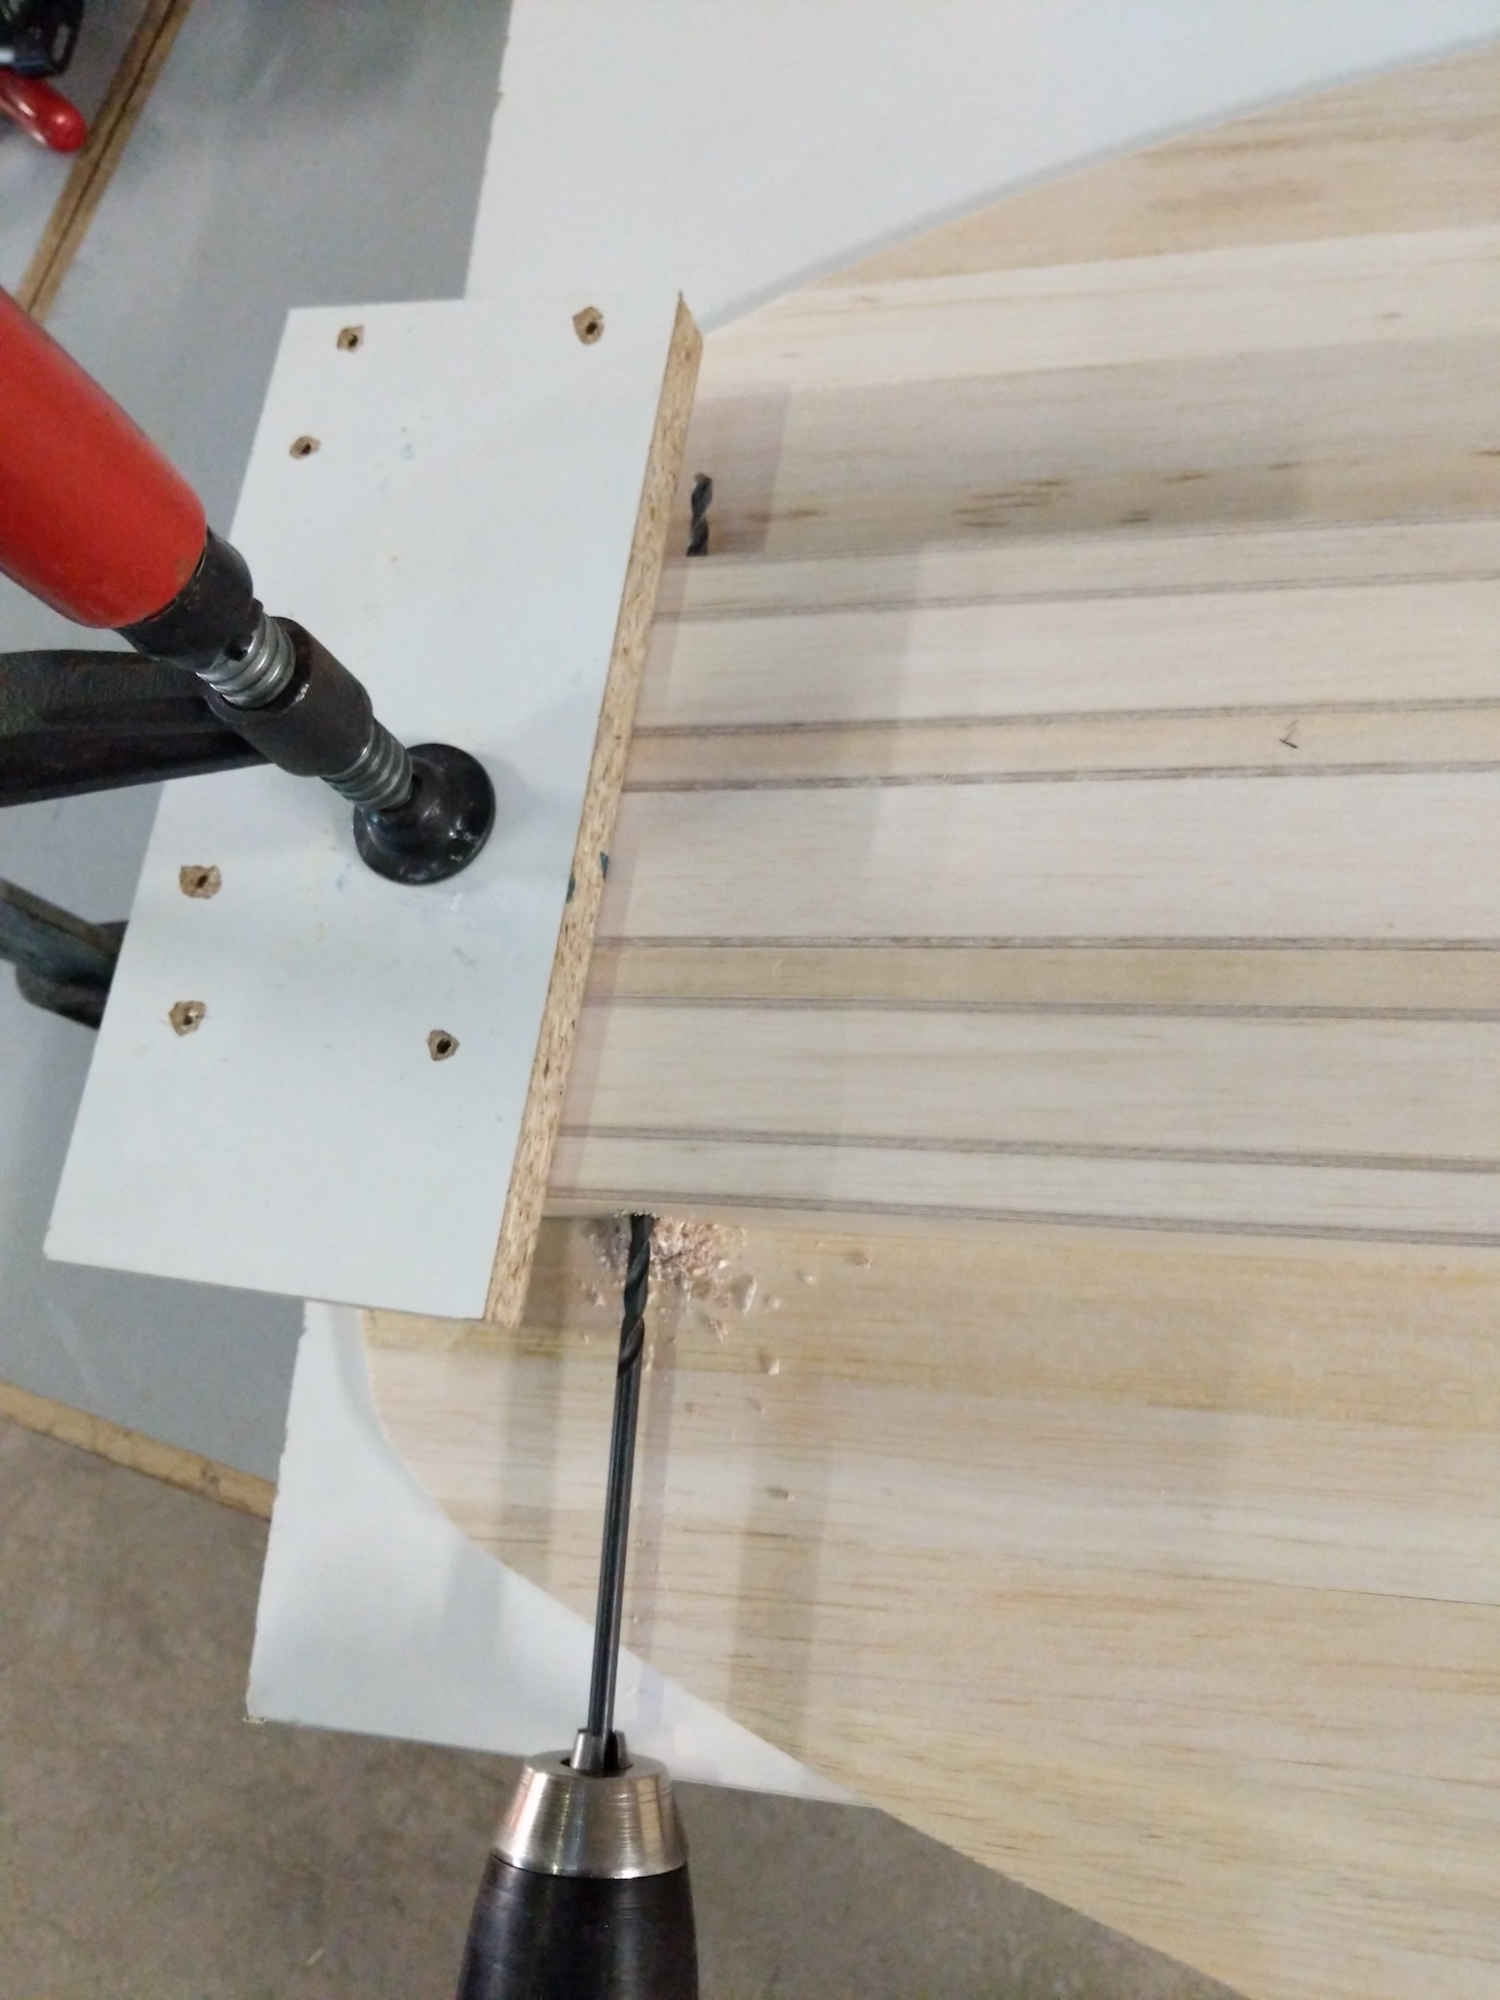 Drilling of surfboard venting holes